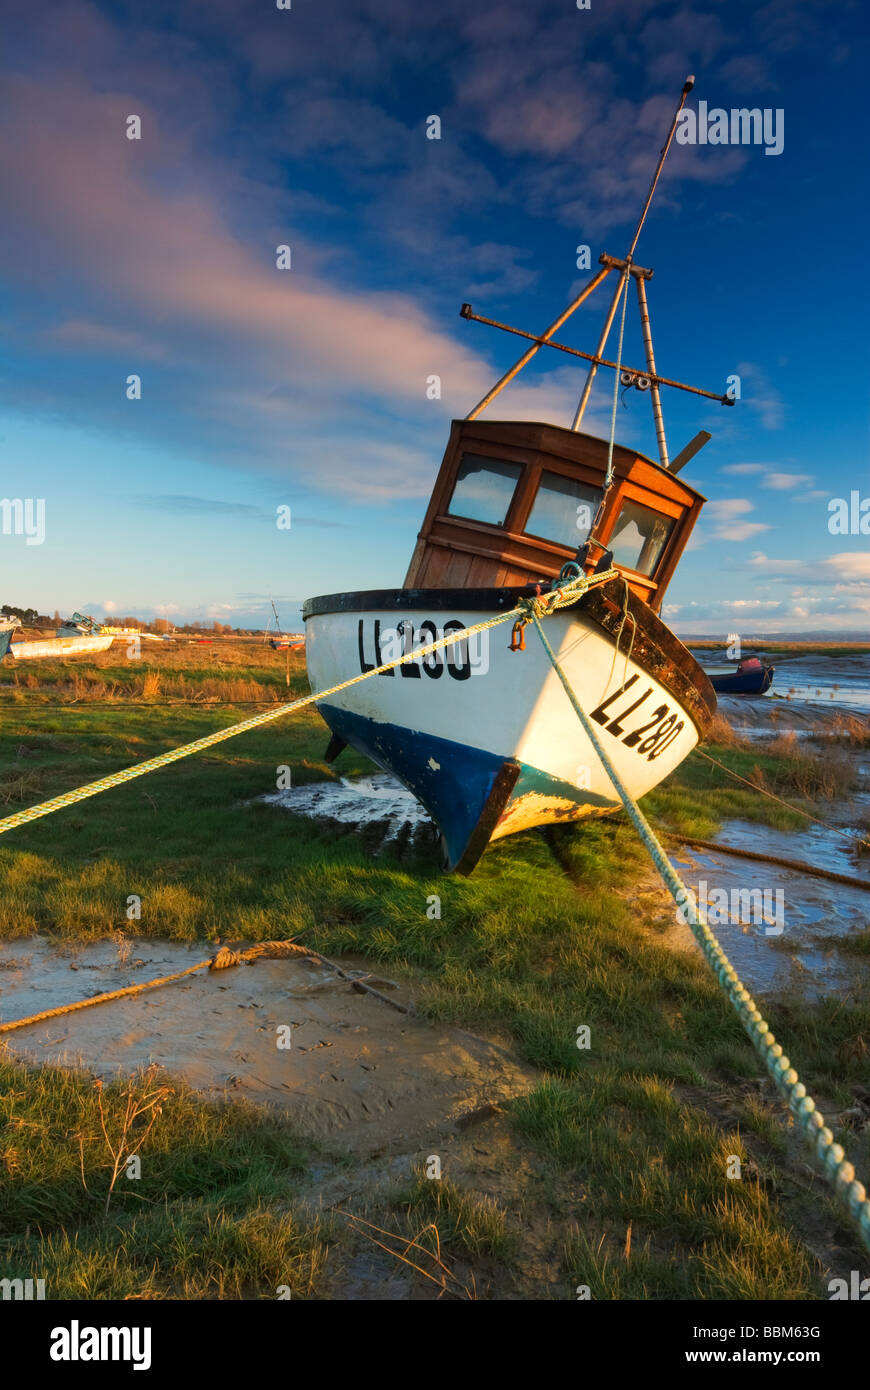 Boats tied up on at Heswall on the Wirral Peninsula. UK GB England EU Europe Stock Photo